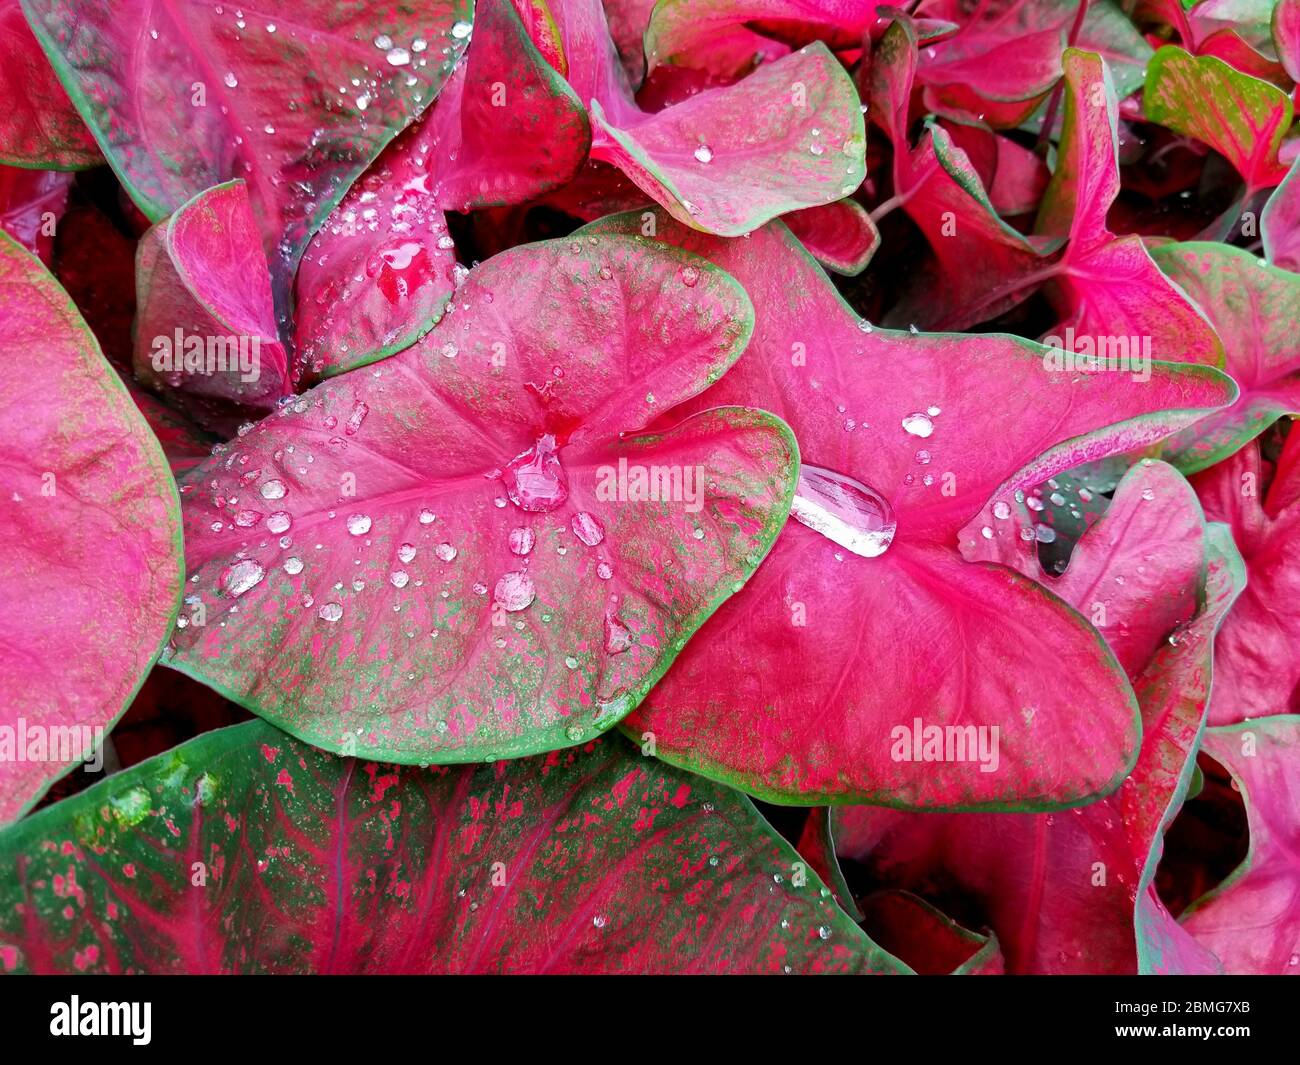 Red and green caladium plants with raindrops Stock Photo